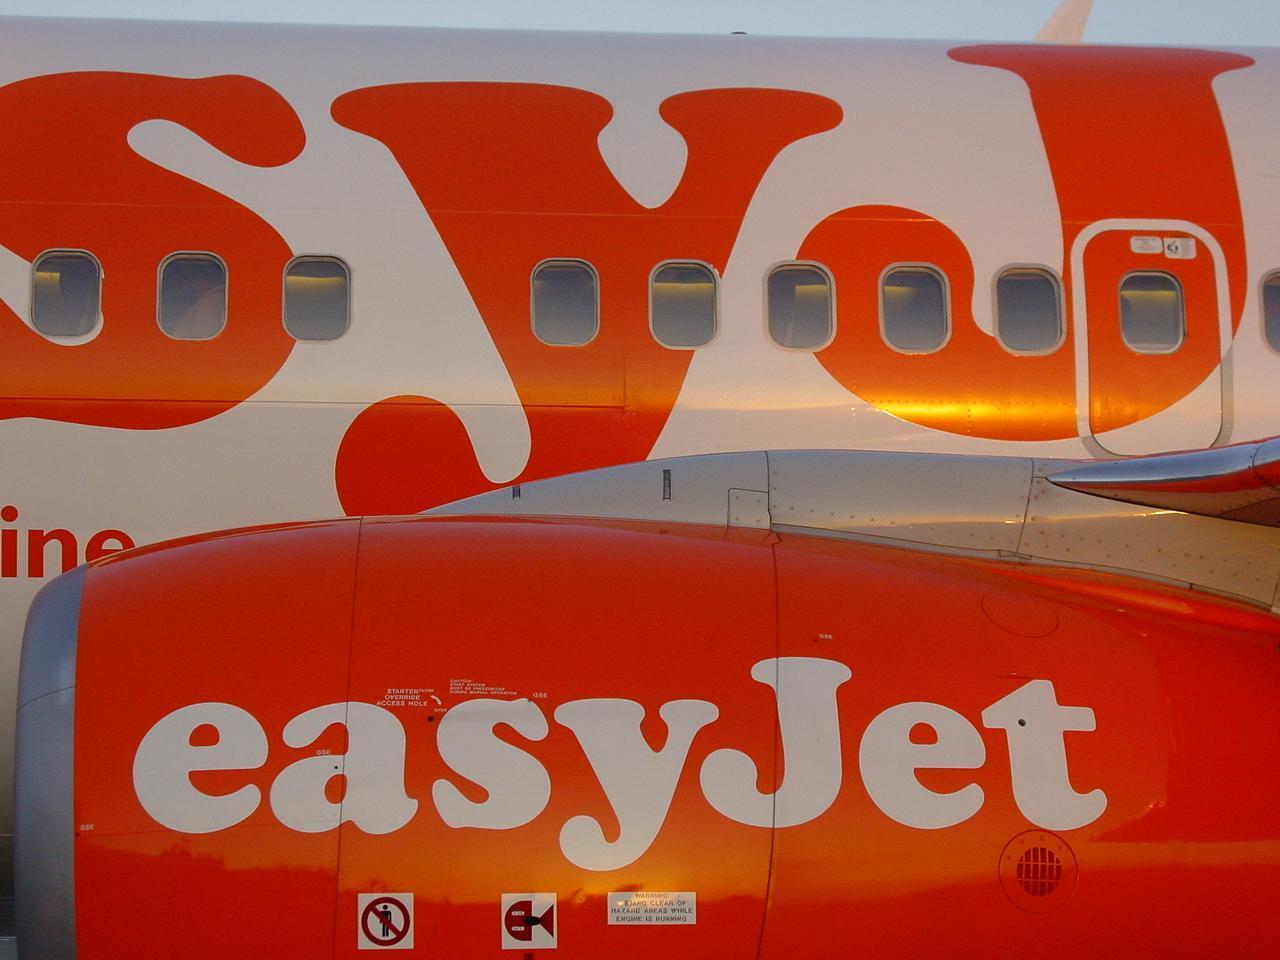 EasyJet is based at London Luton Airport